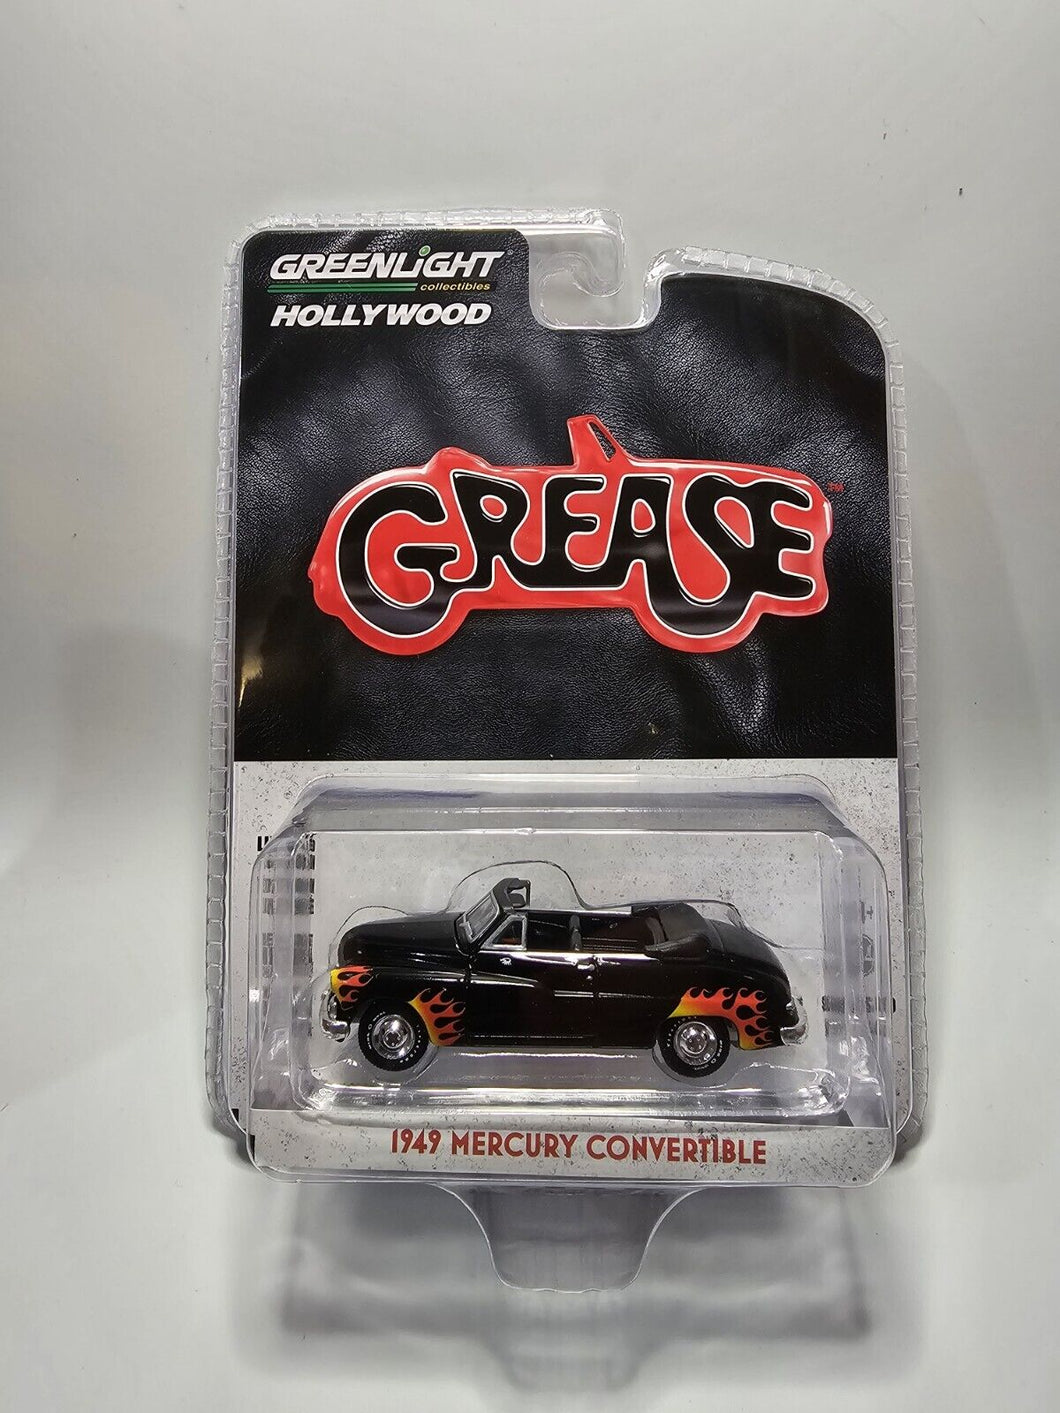 Greenlight Hollywood Grease 1949 Mercury Convertible Series 40 1:64 Diecast Vehicle